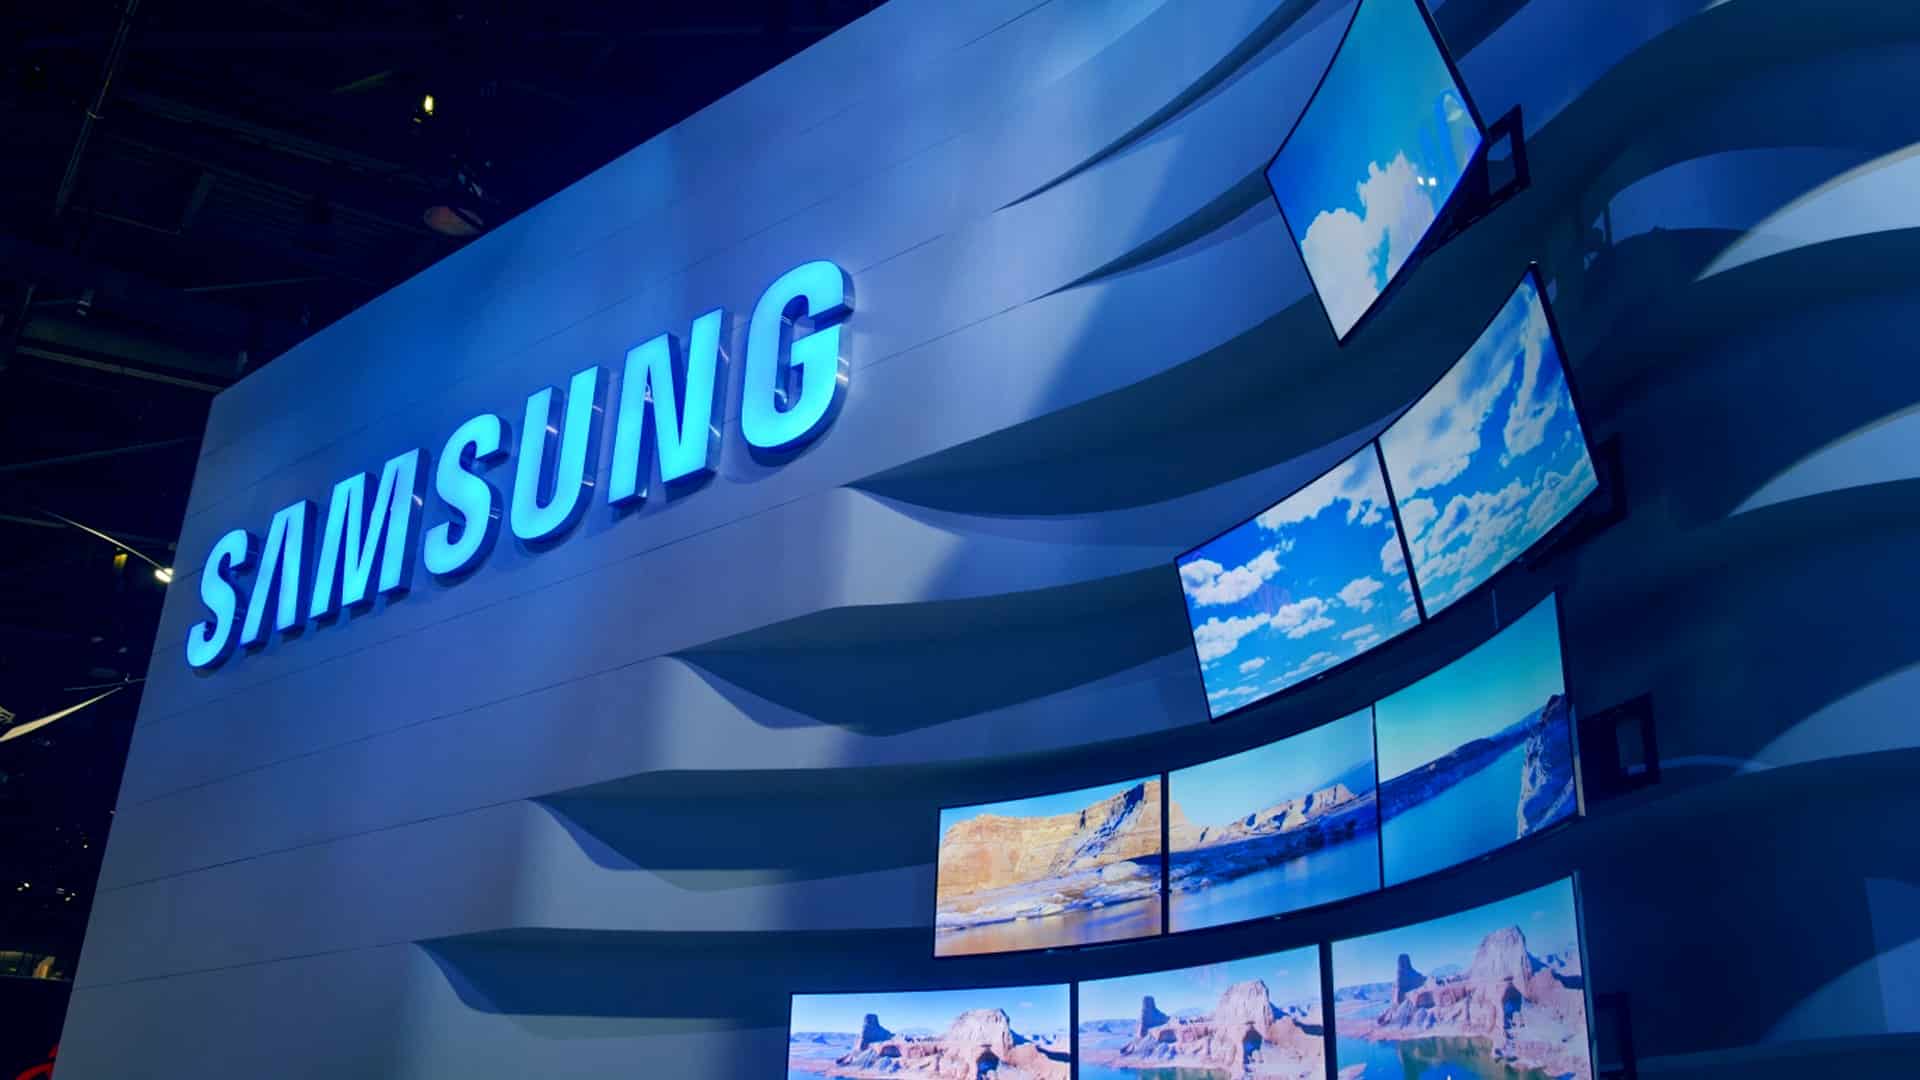 Samsung brings 60 oxygen concentrators from South Korea for UP, 30 of them for Noida